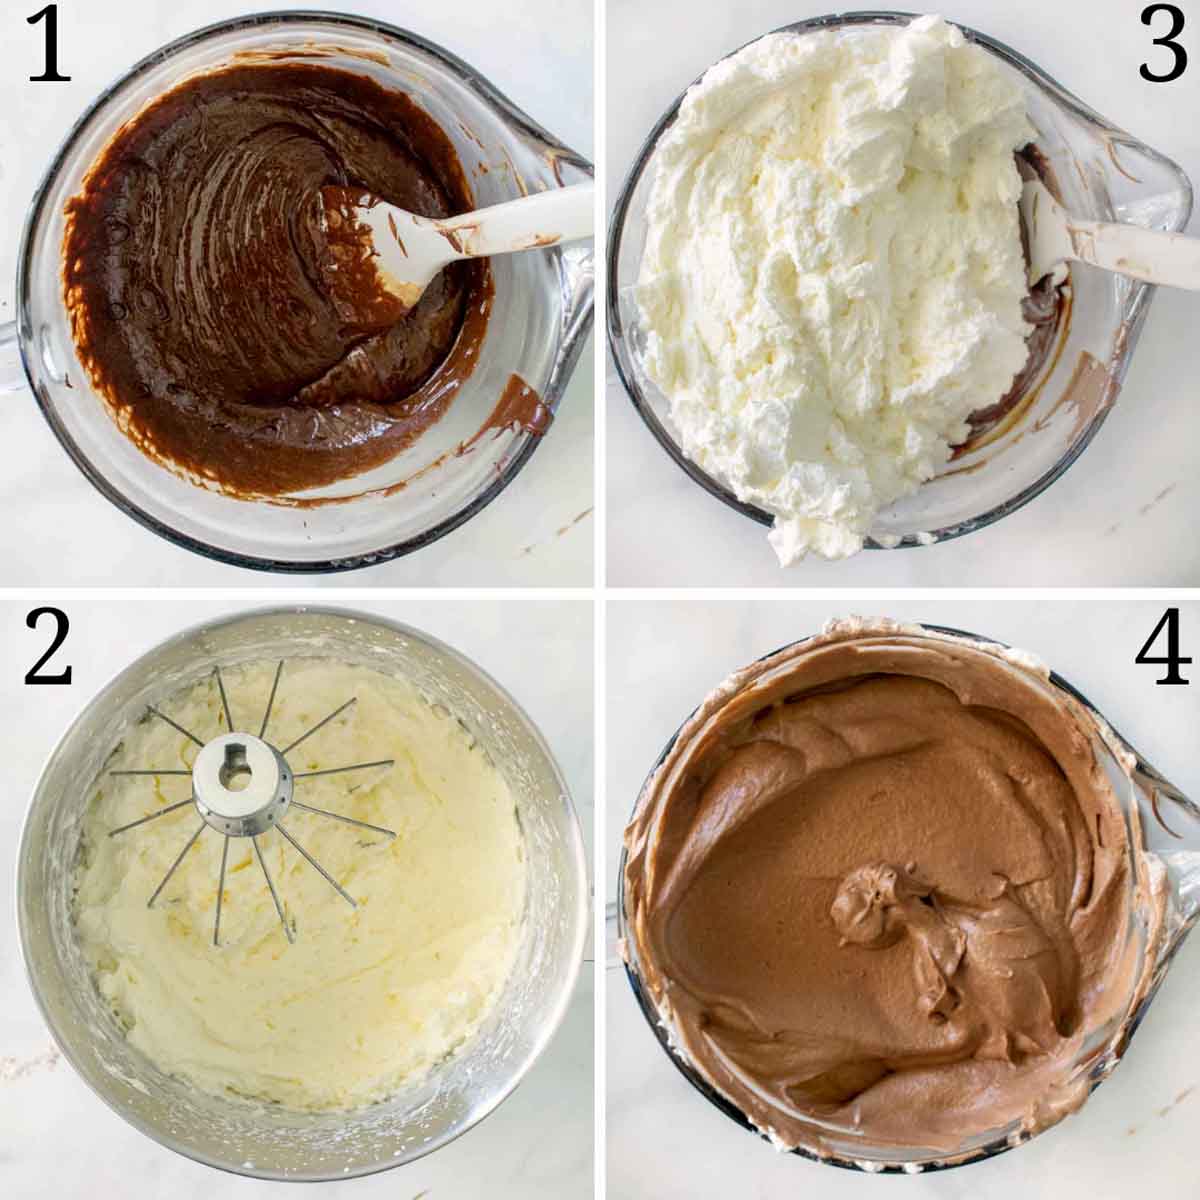 four images showing how to finish making the chocolate mousse